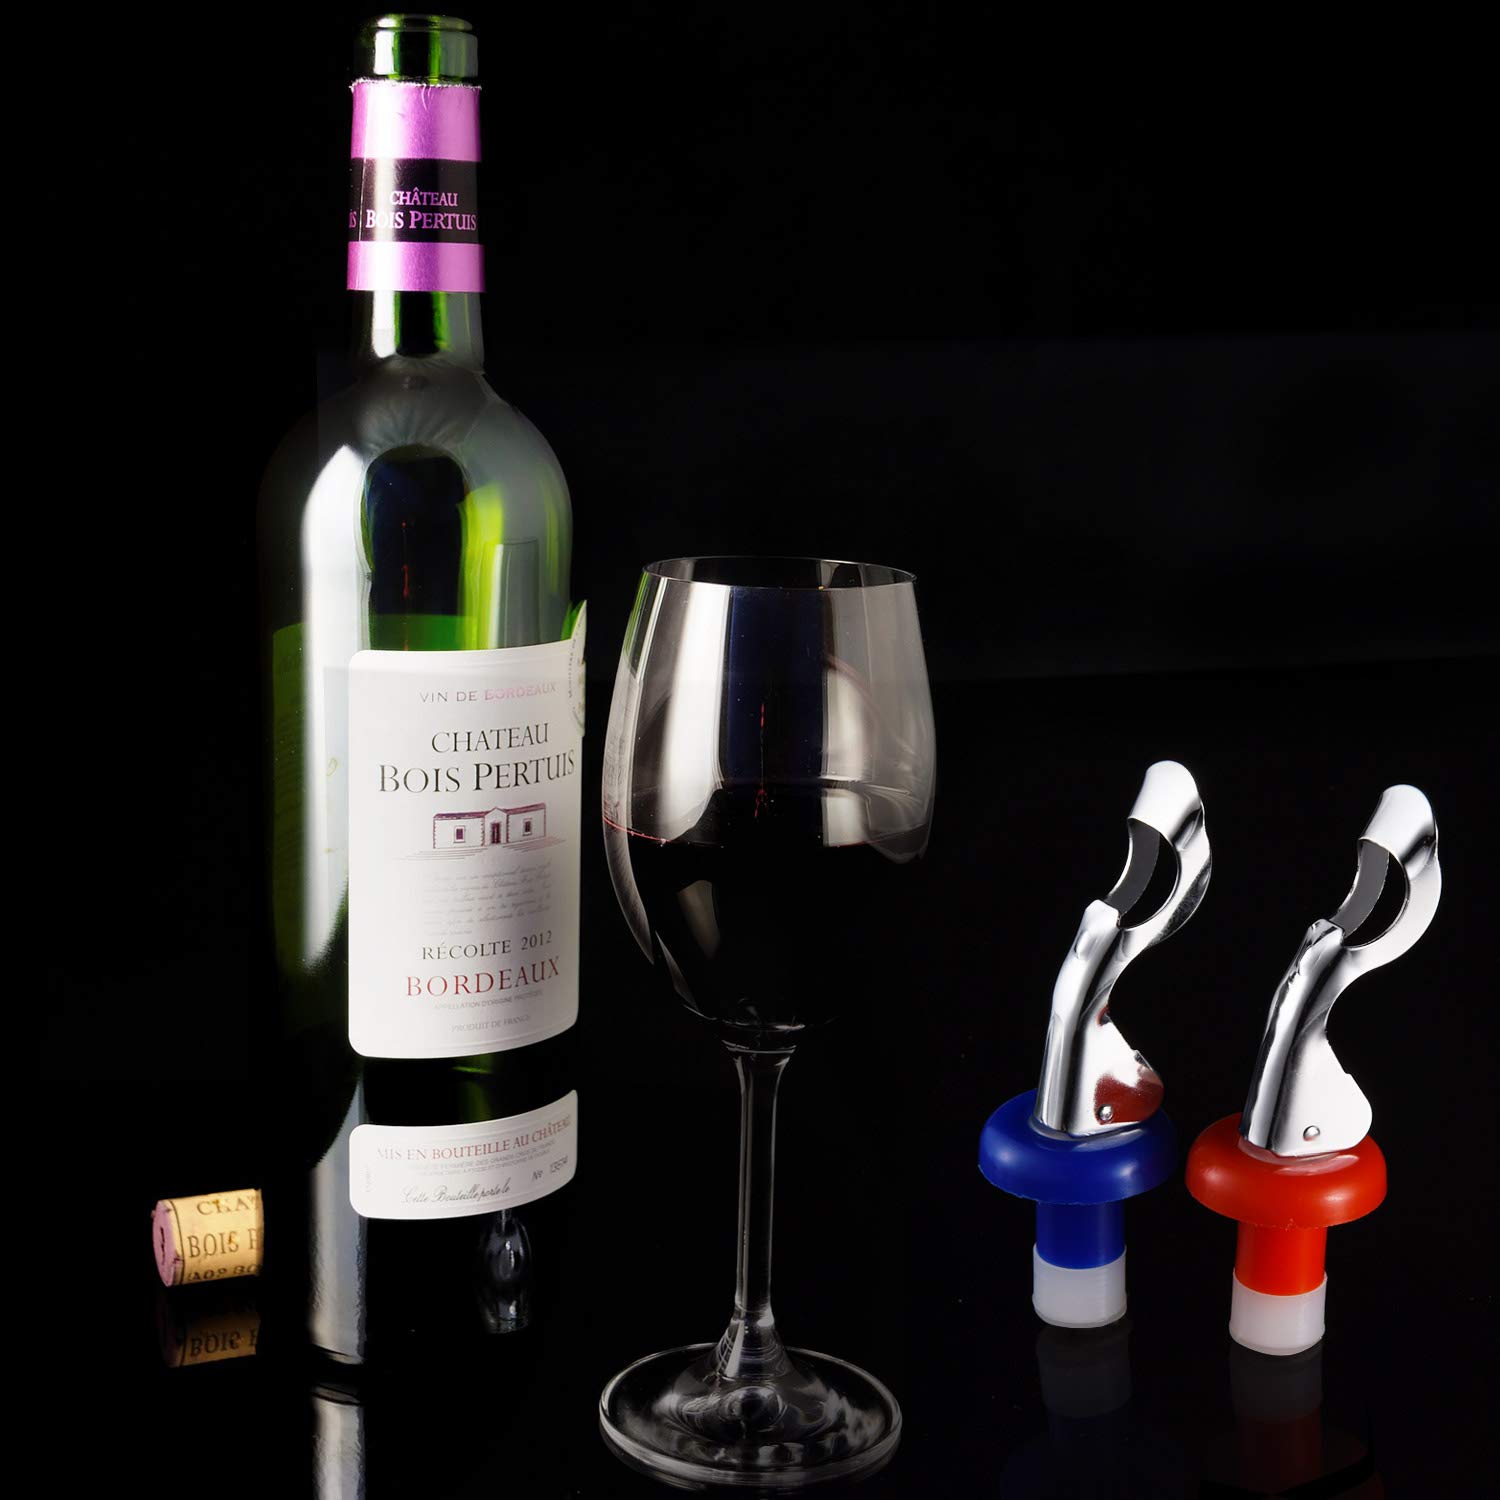 10 Pieces Silicone Wine Stoppers Expanding Manual Beverage Bottle Plug Reusable Leakproof Wine Bottle Airtight Seal Cork